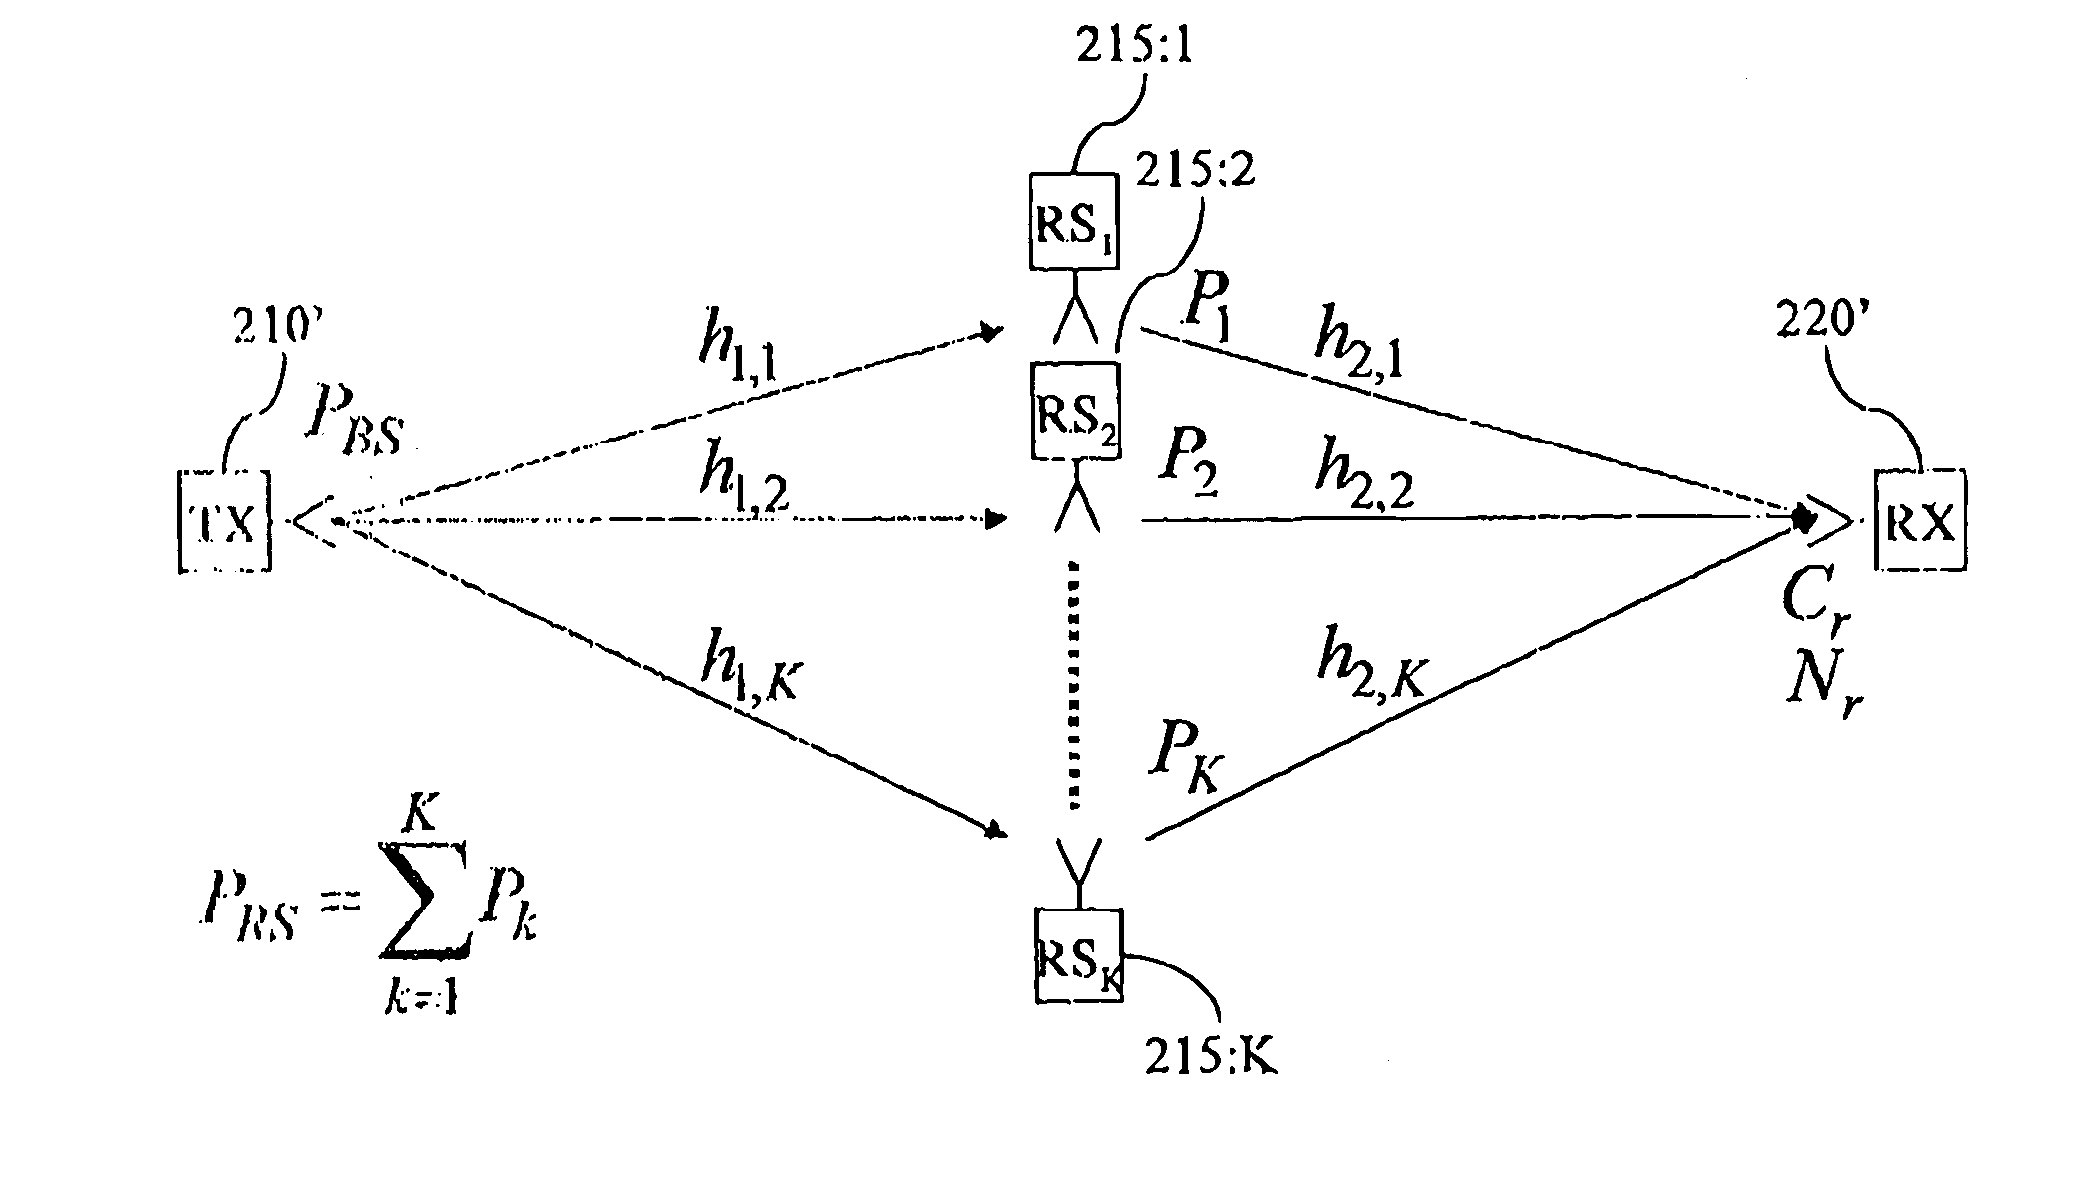 Method and system for wireless communication networks using relaying